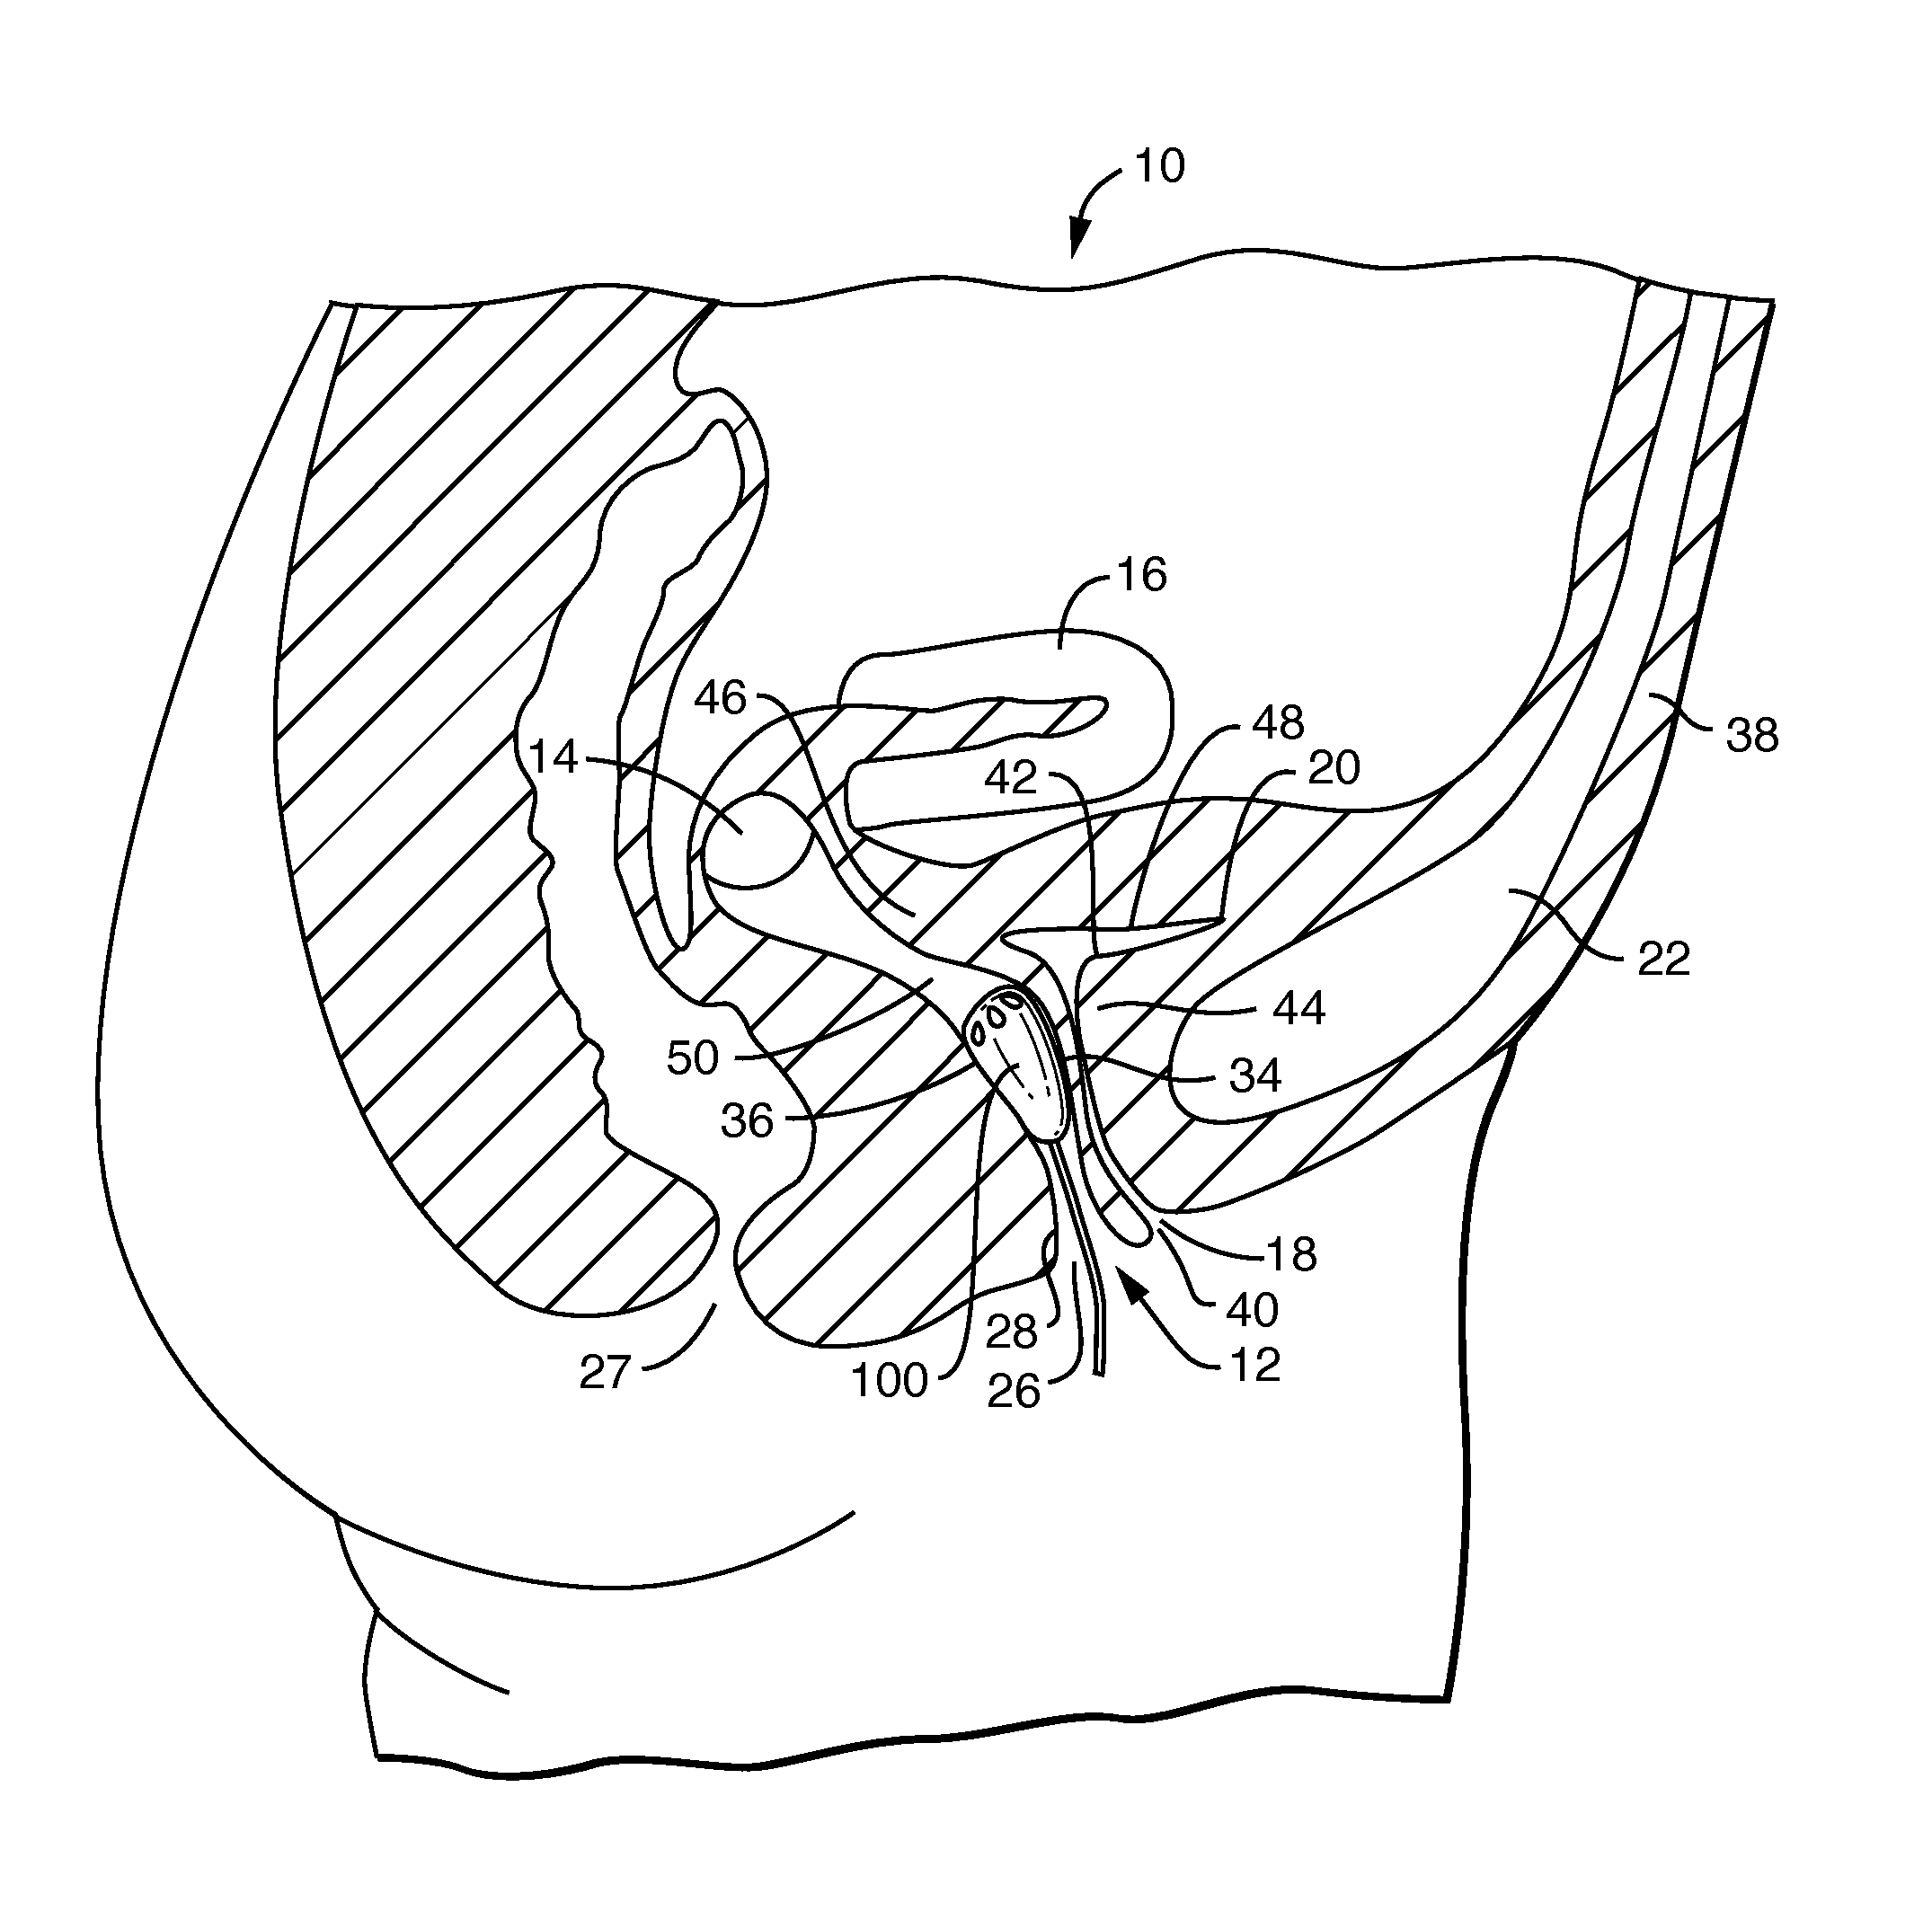 Vaginal Insert Device Having a Support Portion with Plurality of Foldable Areas